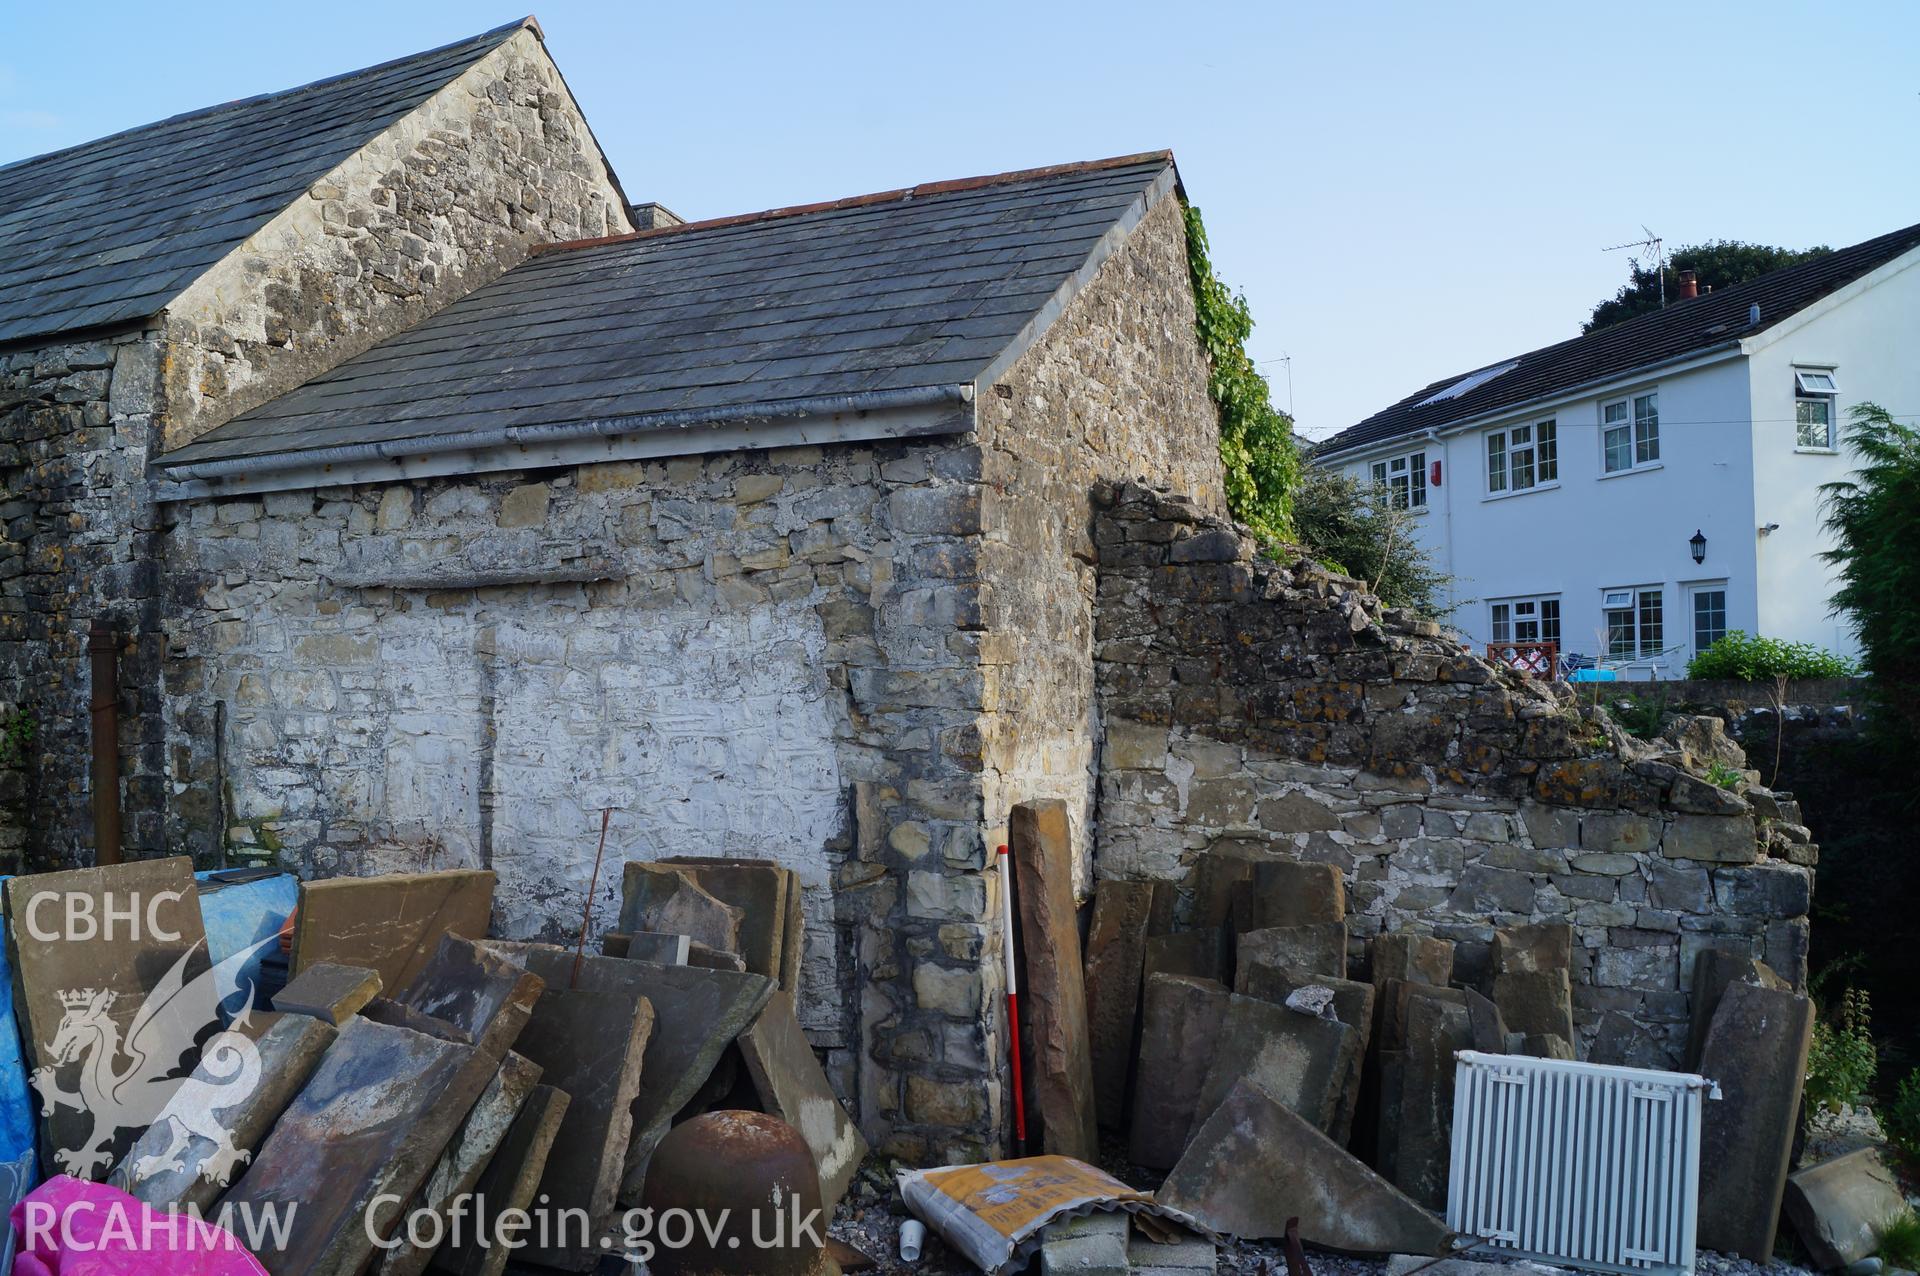 View 'looking south southeast from western end of the building towards the end of the ruined pigsty, extension and western end of barn' at Rowley Court, Llantwit Major. Photograph & description by Jenny Hall & Paul Sambrook of Trysor, 7th September 2016.